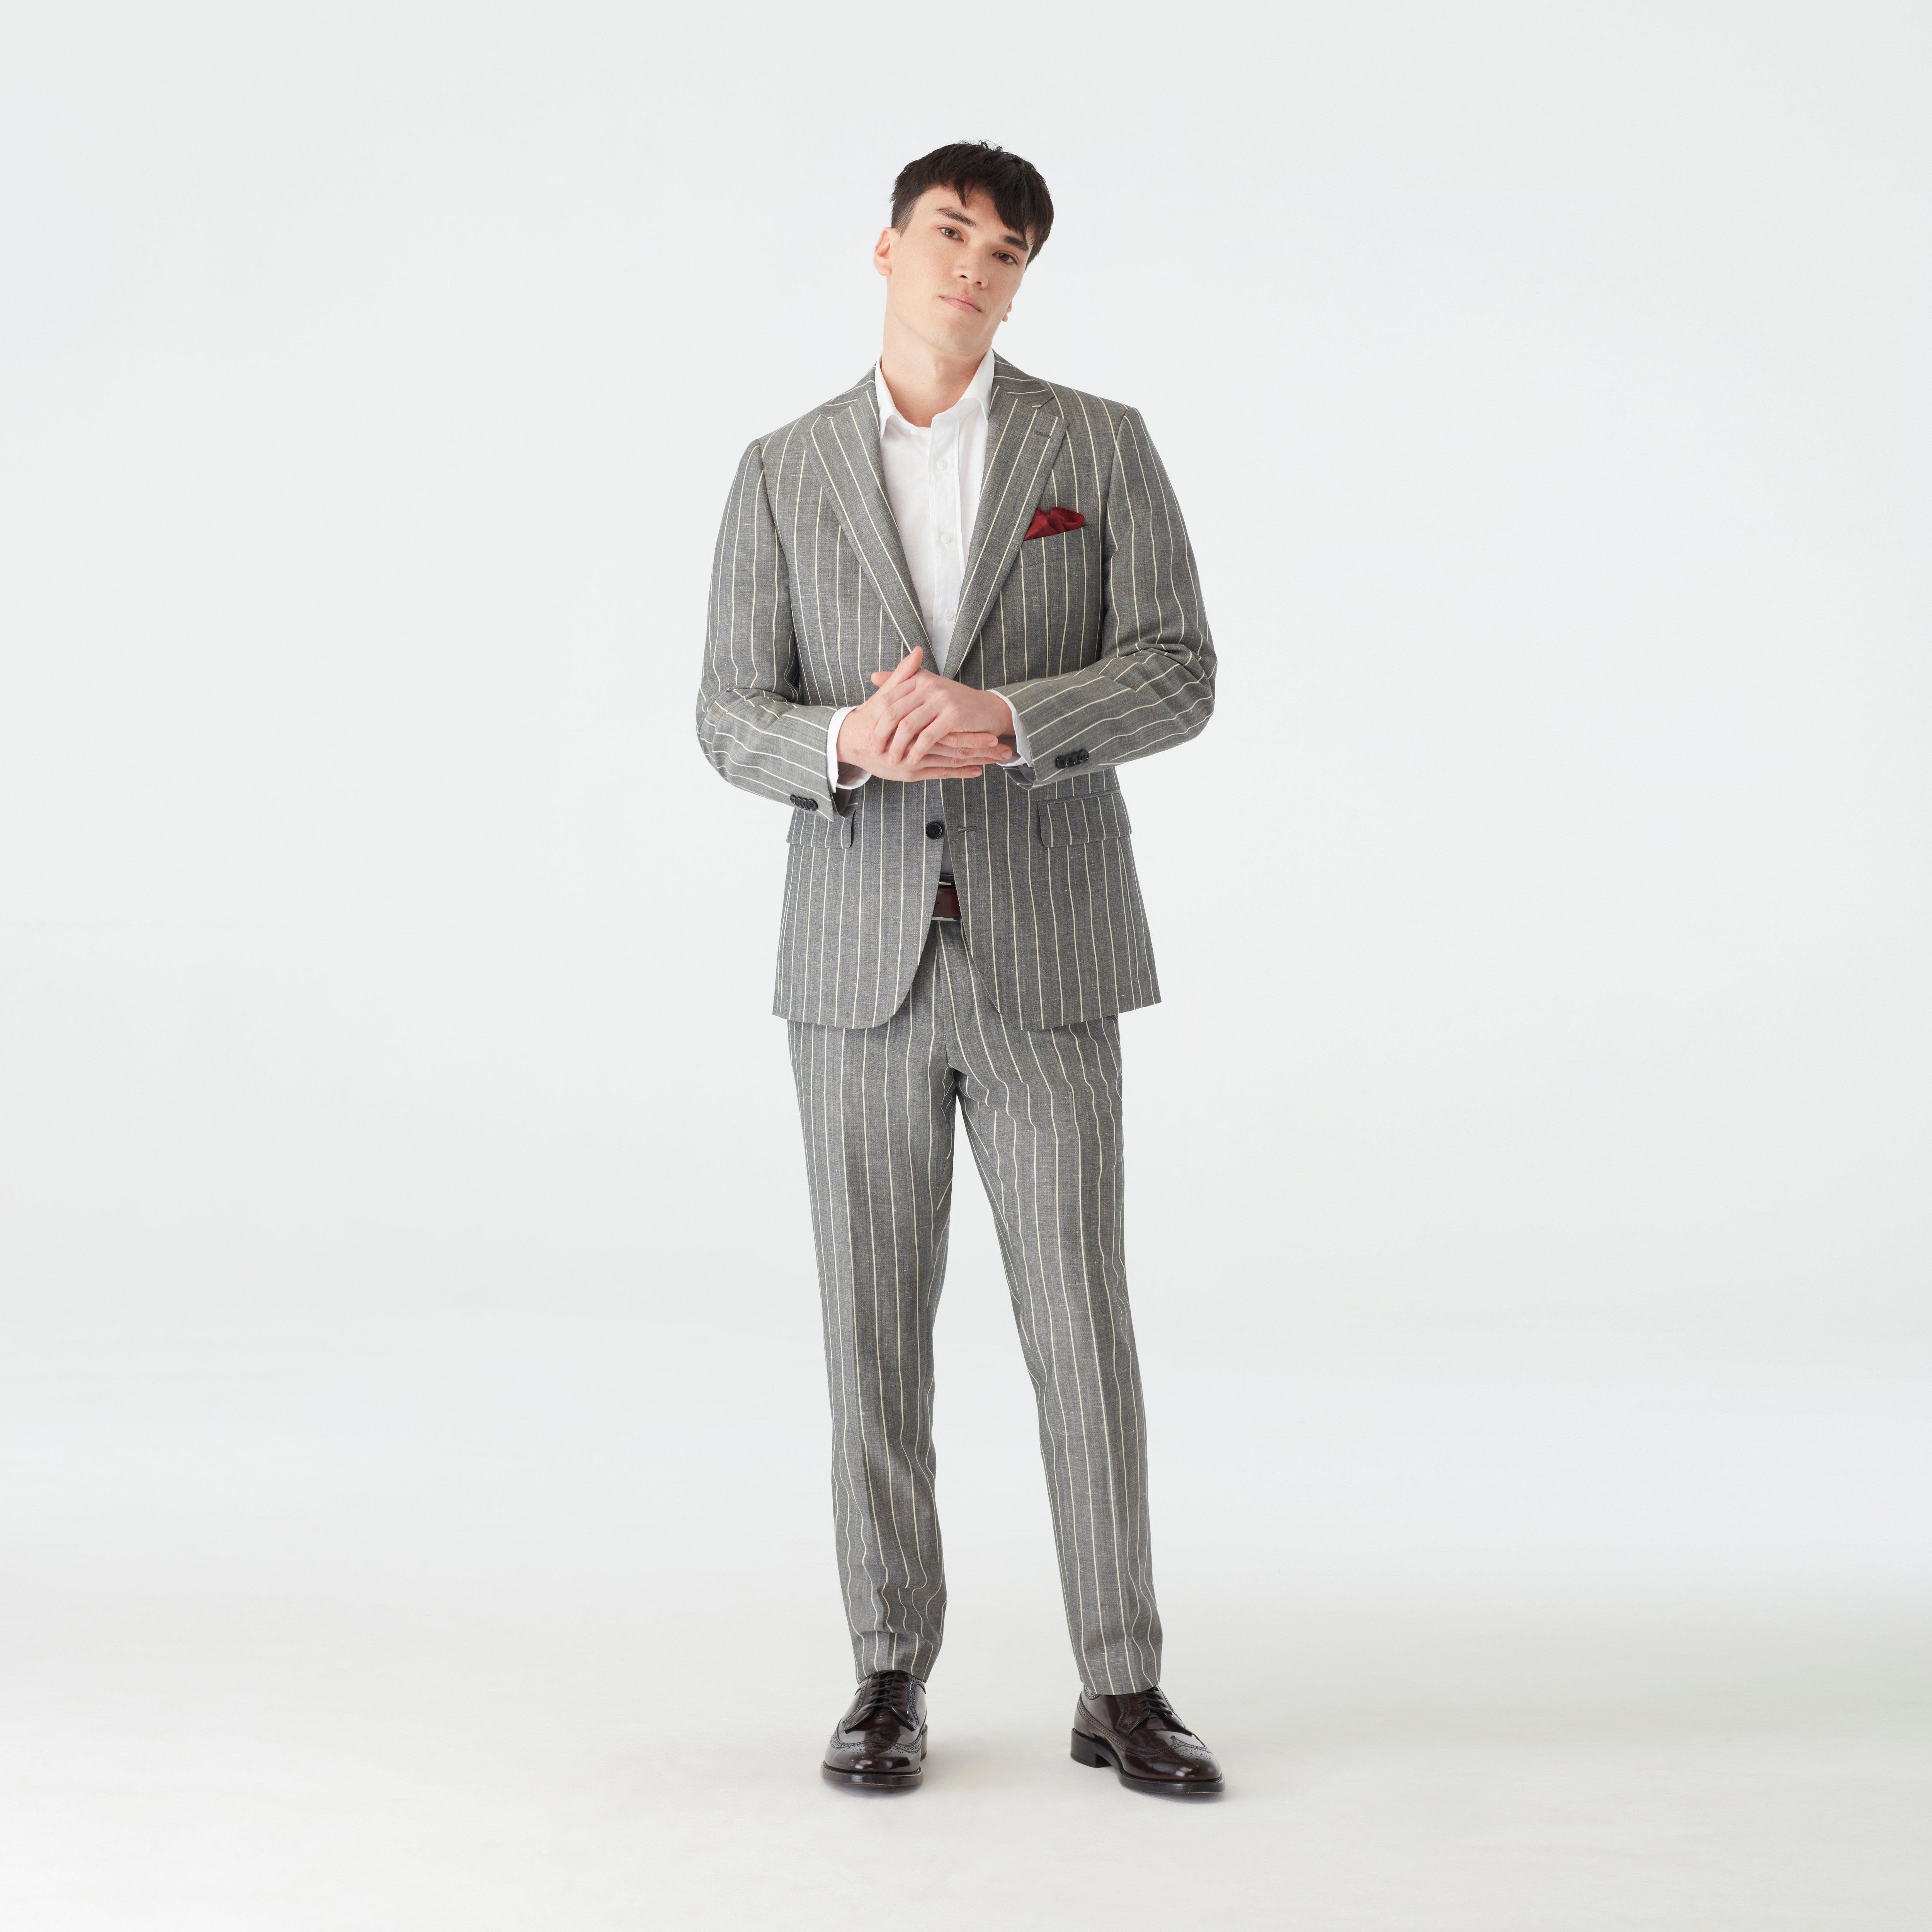 Custom Suits Made For You - Kingsbury Wide Stripe Gray Suit | INDOCHINO